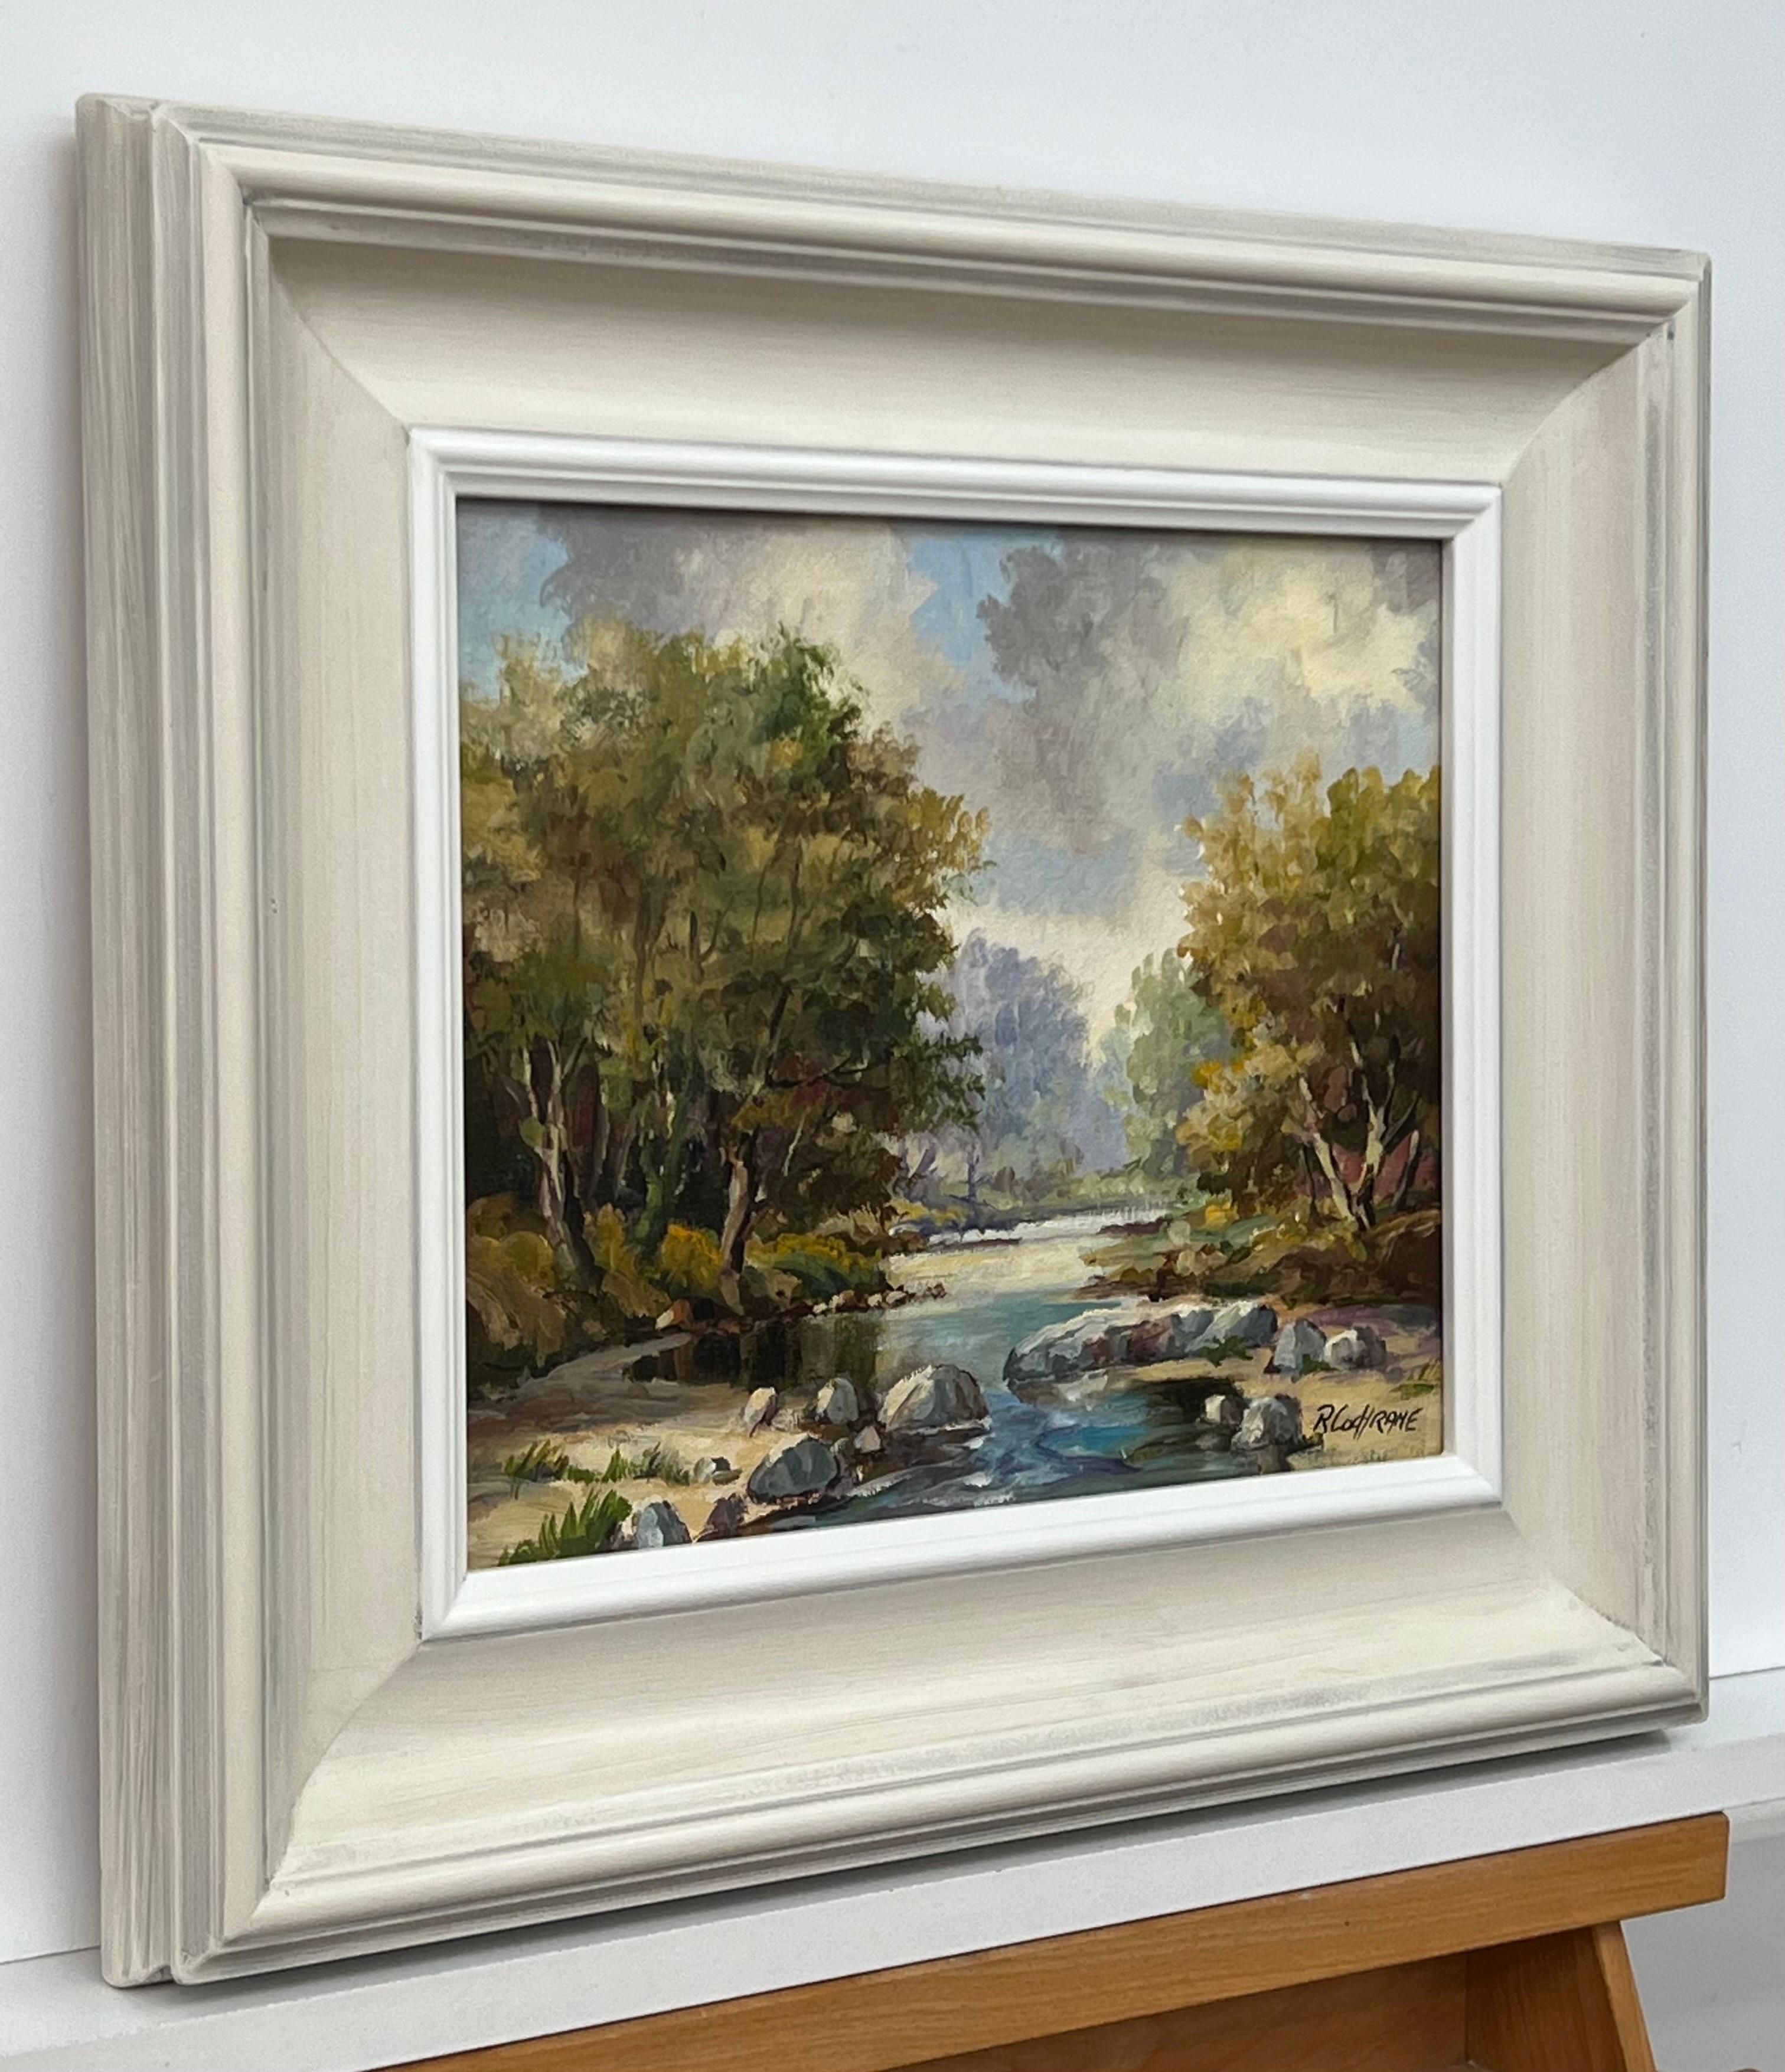 Vintage Post-Impressionist Oil Painting of a Tree-Lined River in the Countryside of Northern Ireland by 20th Century Irish Artist, Ray Cochrane.

Art measures 12 x 10 inches
Frame measures 18 x 16 inches

This impressionistic 1980's vintage original